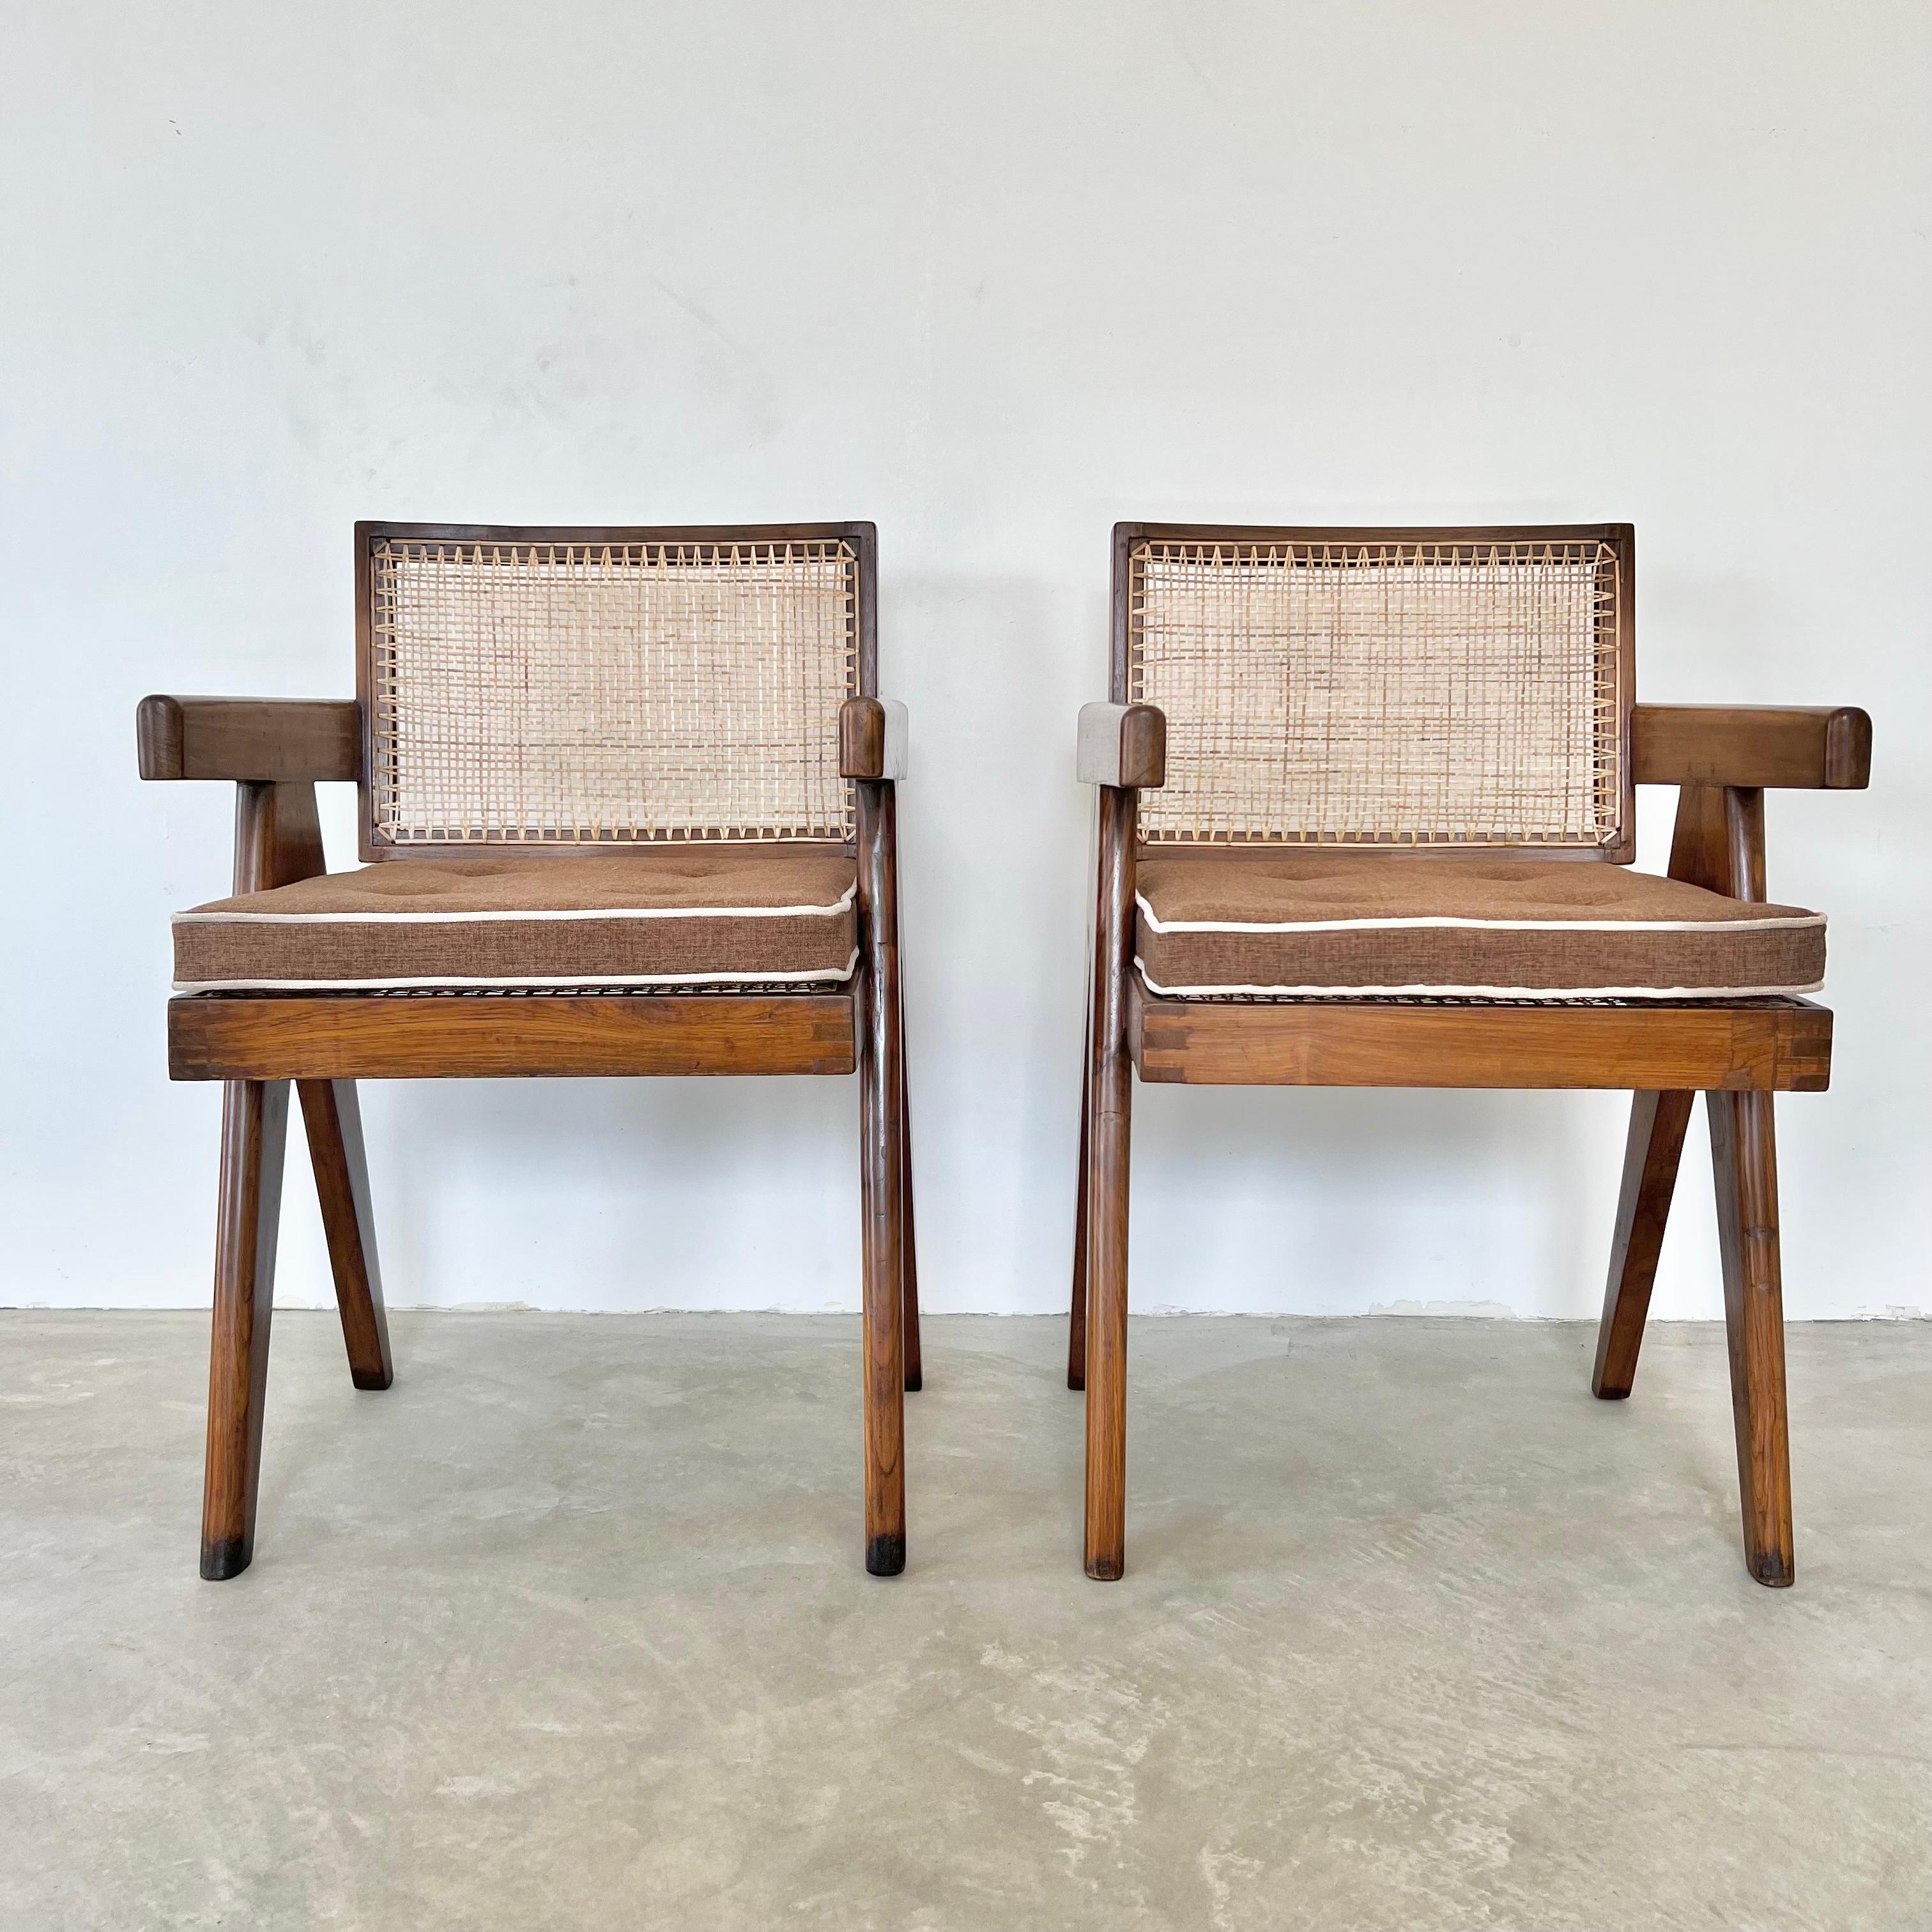 Indian Pierre Jeanneret Office Chairs, 1950s Chandigargh For Sale